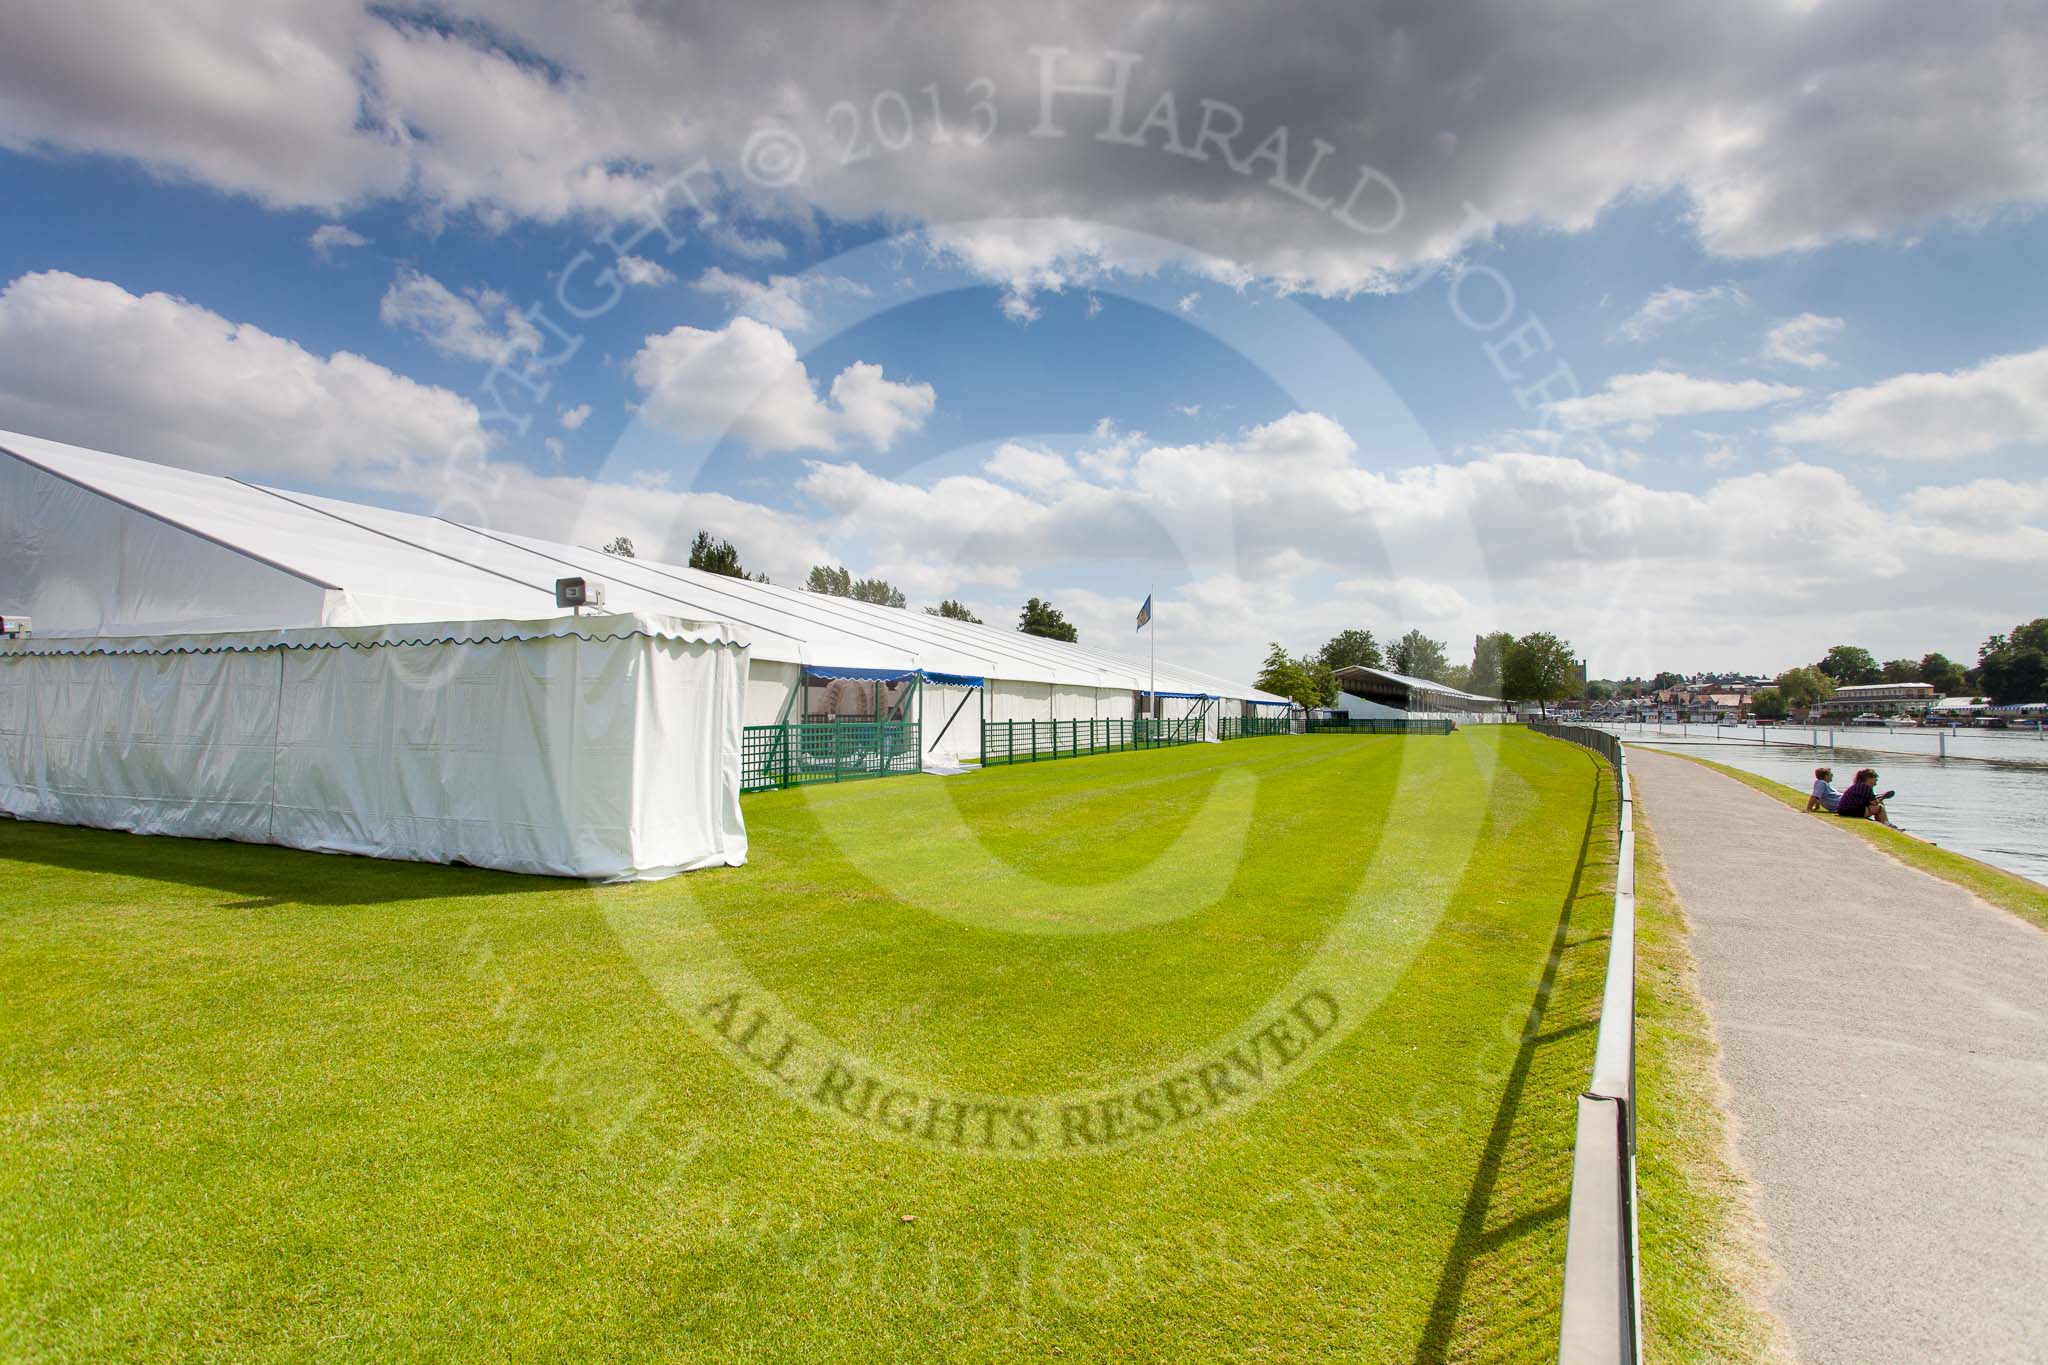 Henley Royal Regatta 2013 (Monday): Preparations for the regatta - tents on the eastern side of the Thames..
River Thames between Henley and Temple Island,
Henley-on-Thames,
Berkshire,
United Kingdom,
on 01 July 2013 at 15:41, image #41